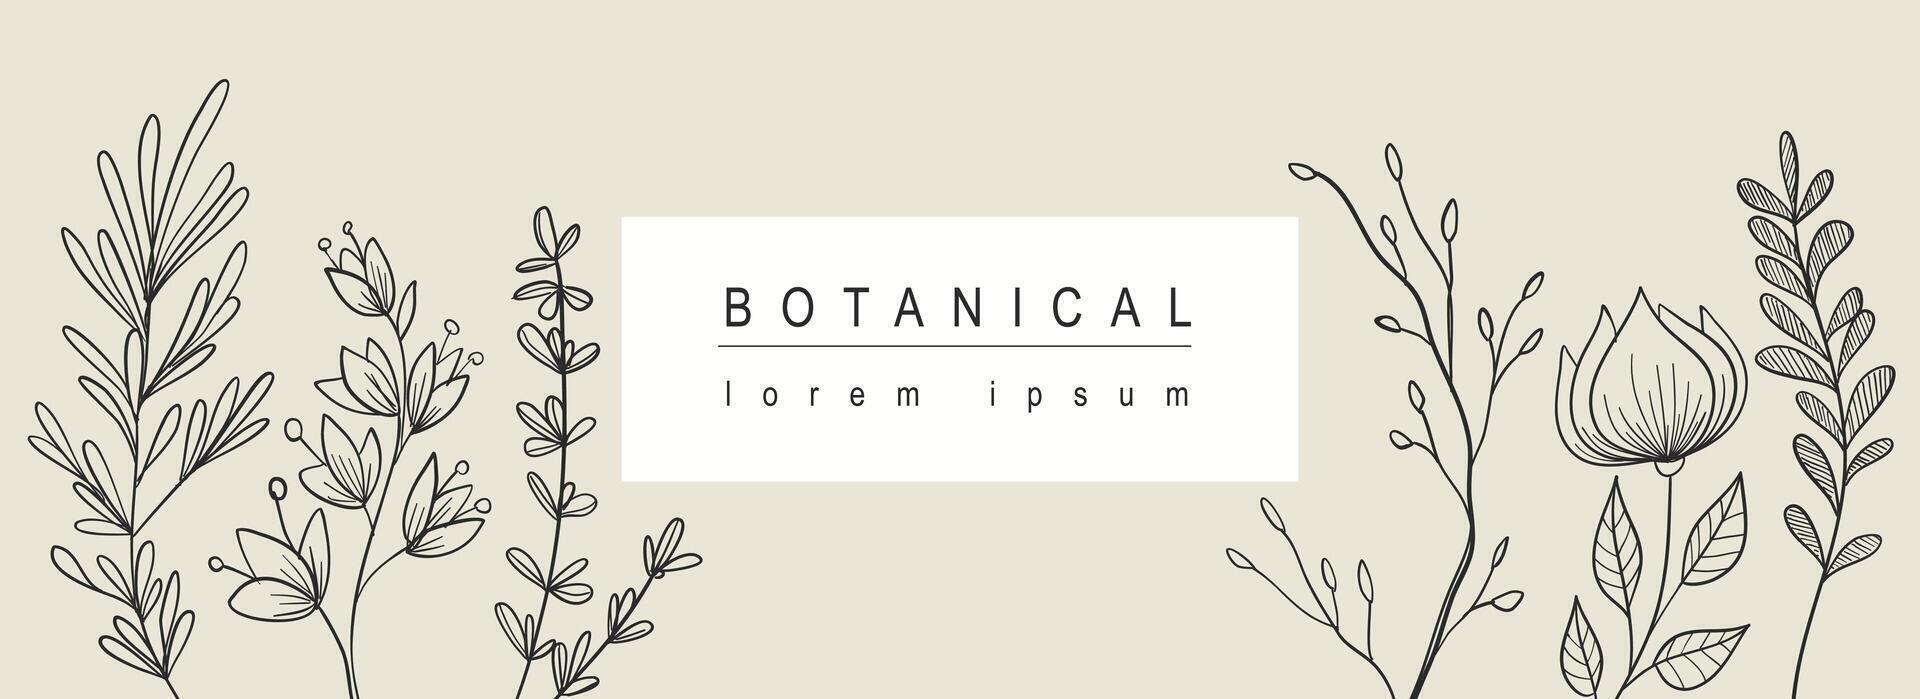 Botanical abstract background with floral line art design. Horizontal web banner with minimal elegant composition of blooming flowers, foliage greenery and twigs with leaves. Vector illustration.